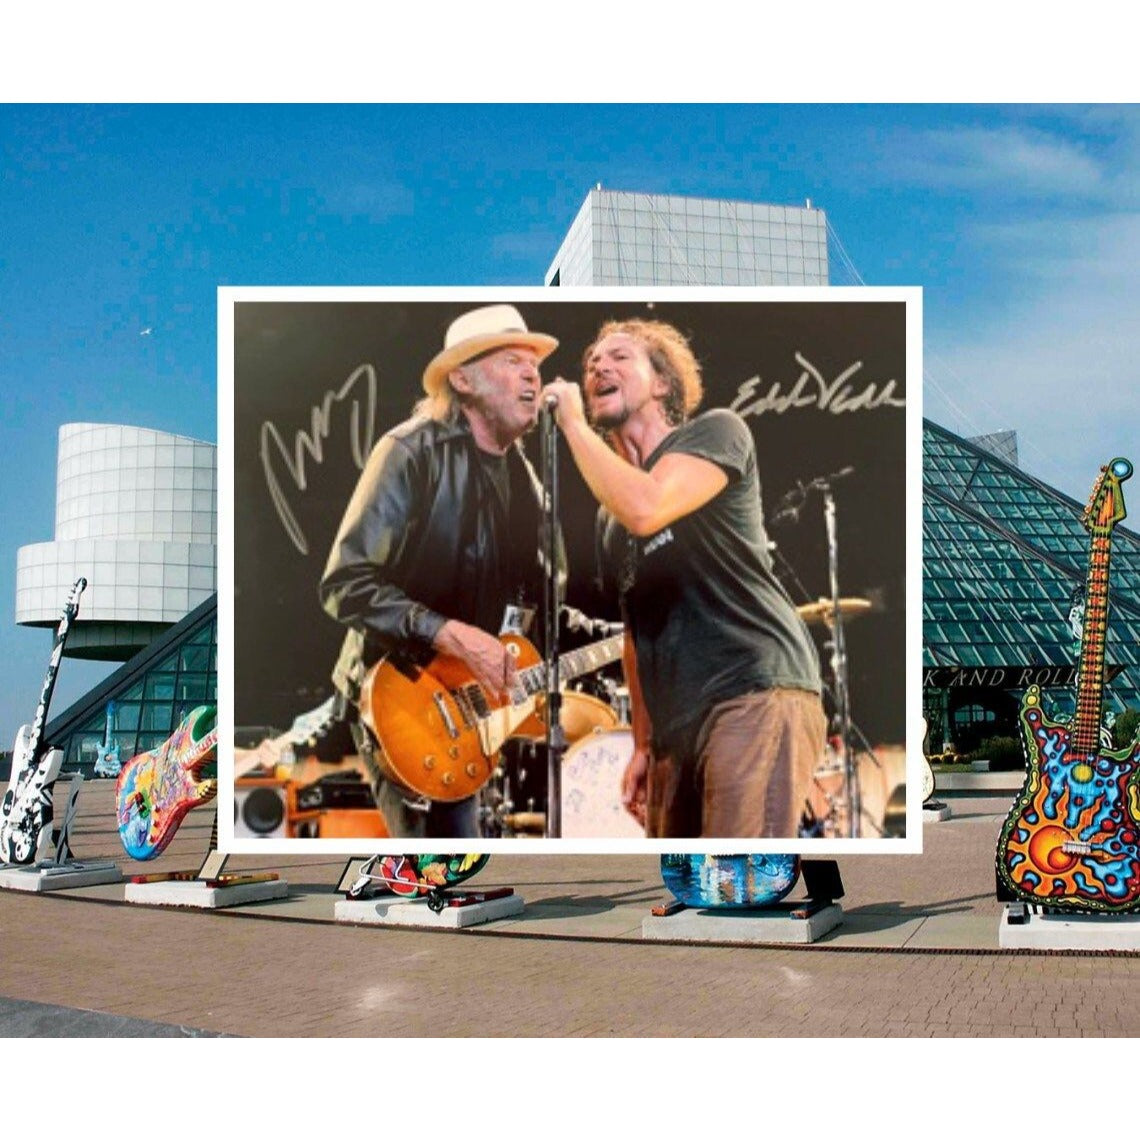 Eddie Vedder and Neil Young 8 x 10 signed photo with proof